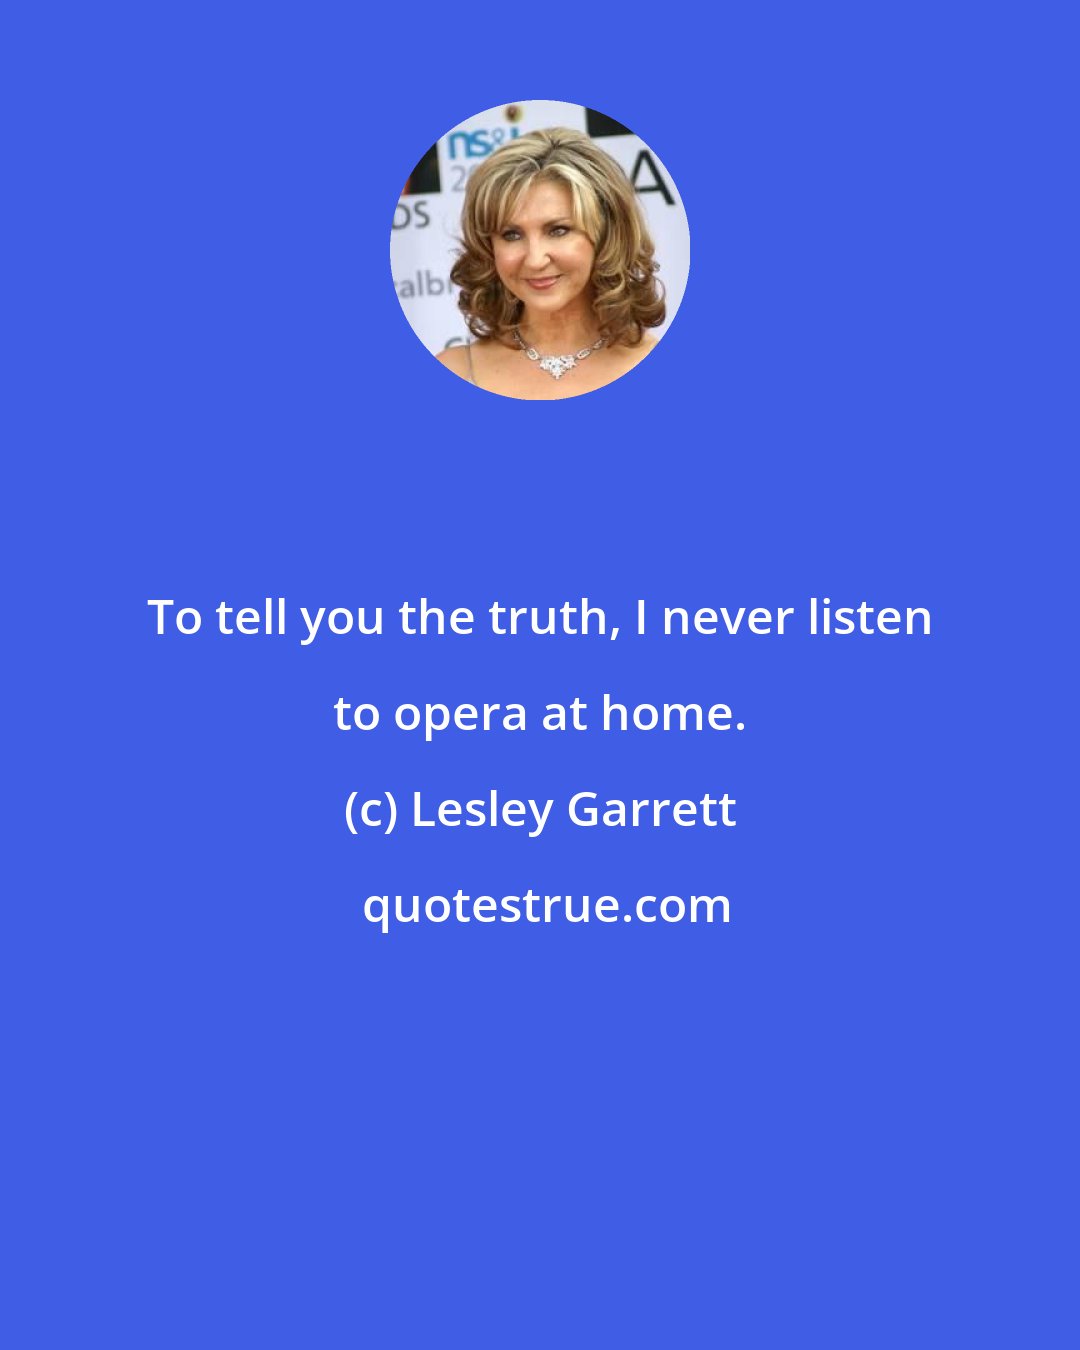 Lesley Garrett: To tell you the truth, I never listen to opera at home.